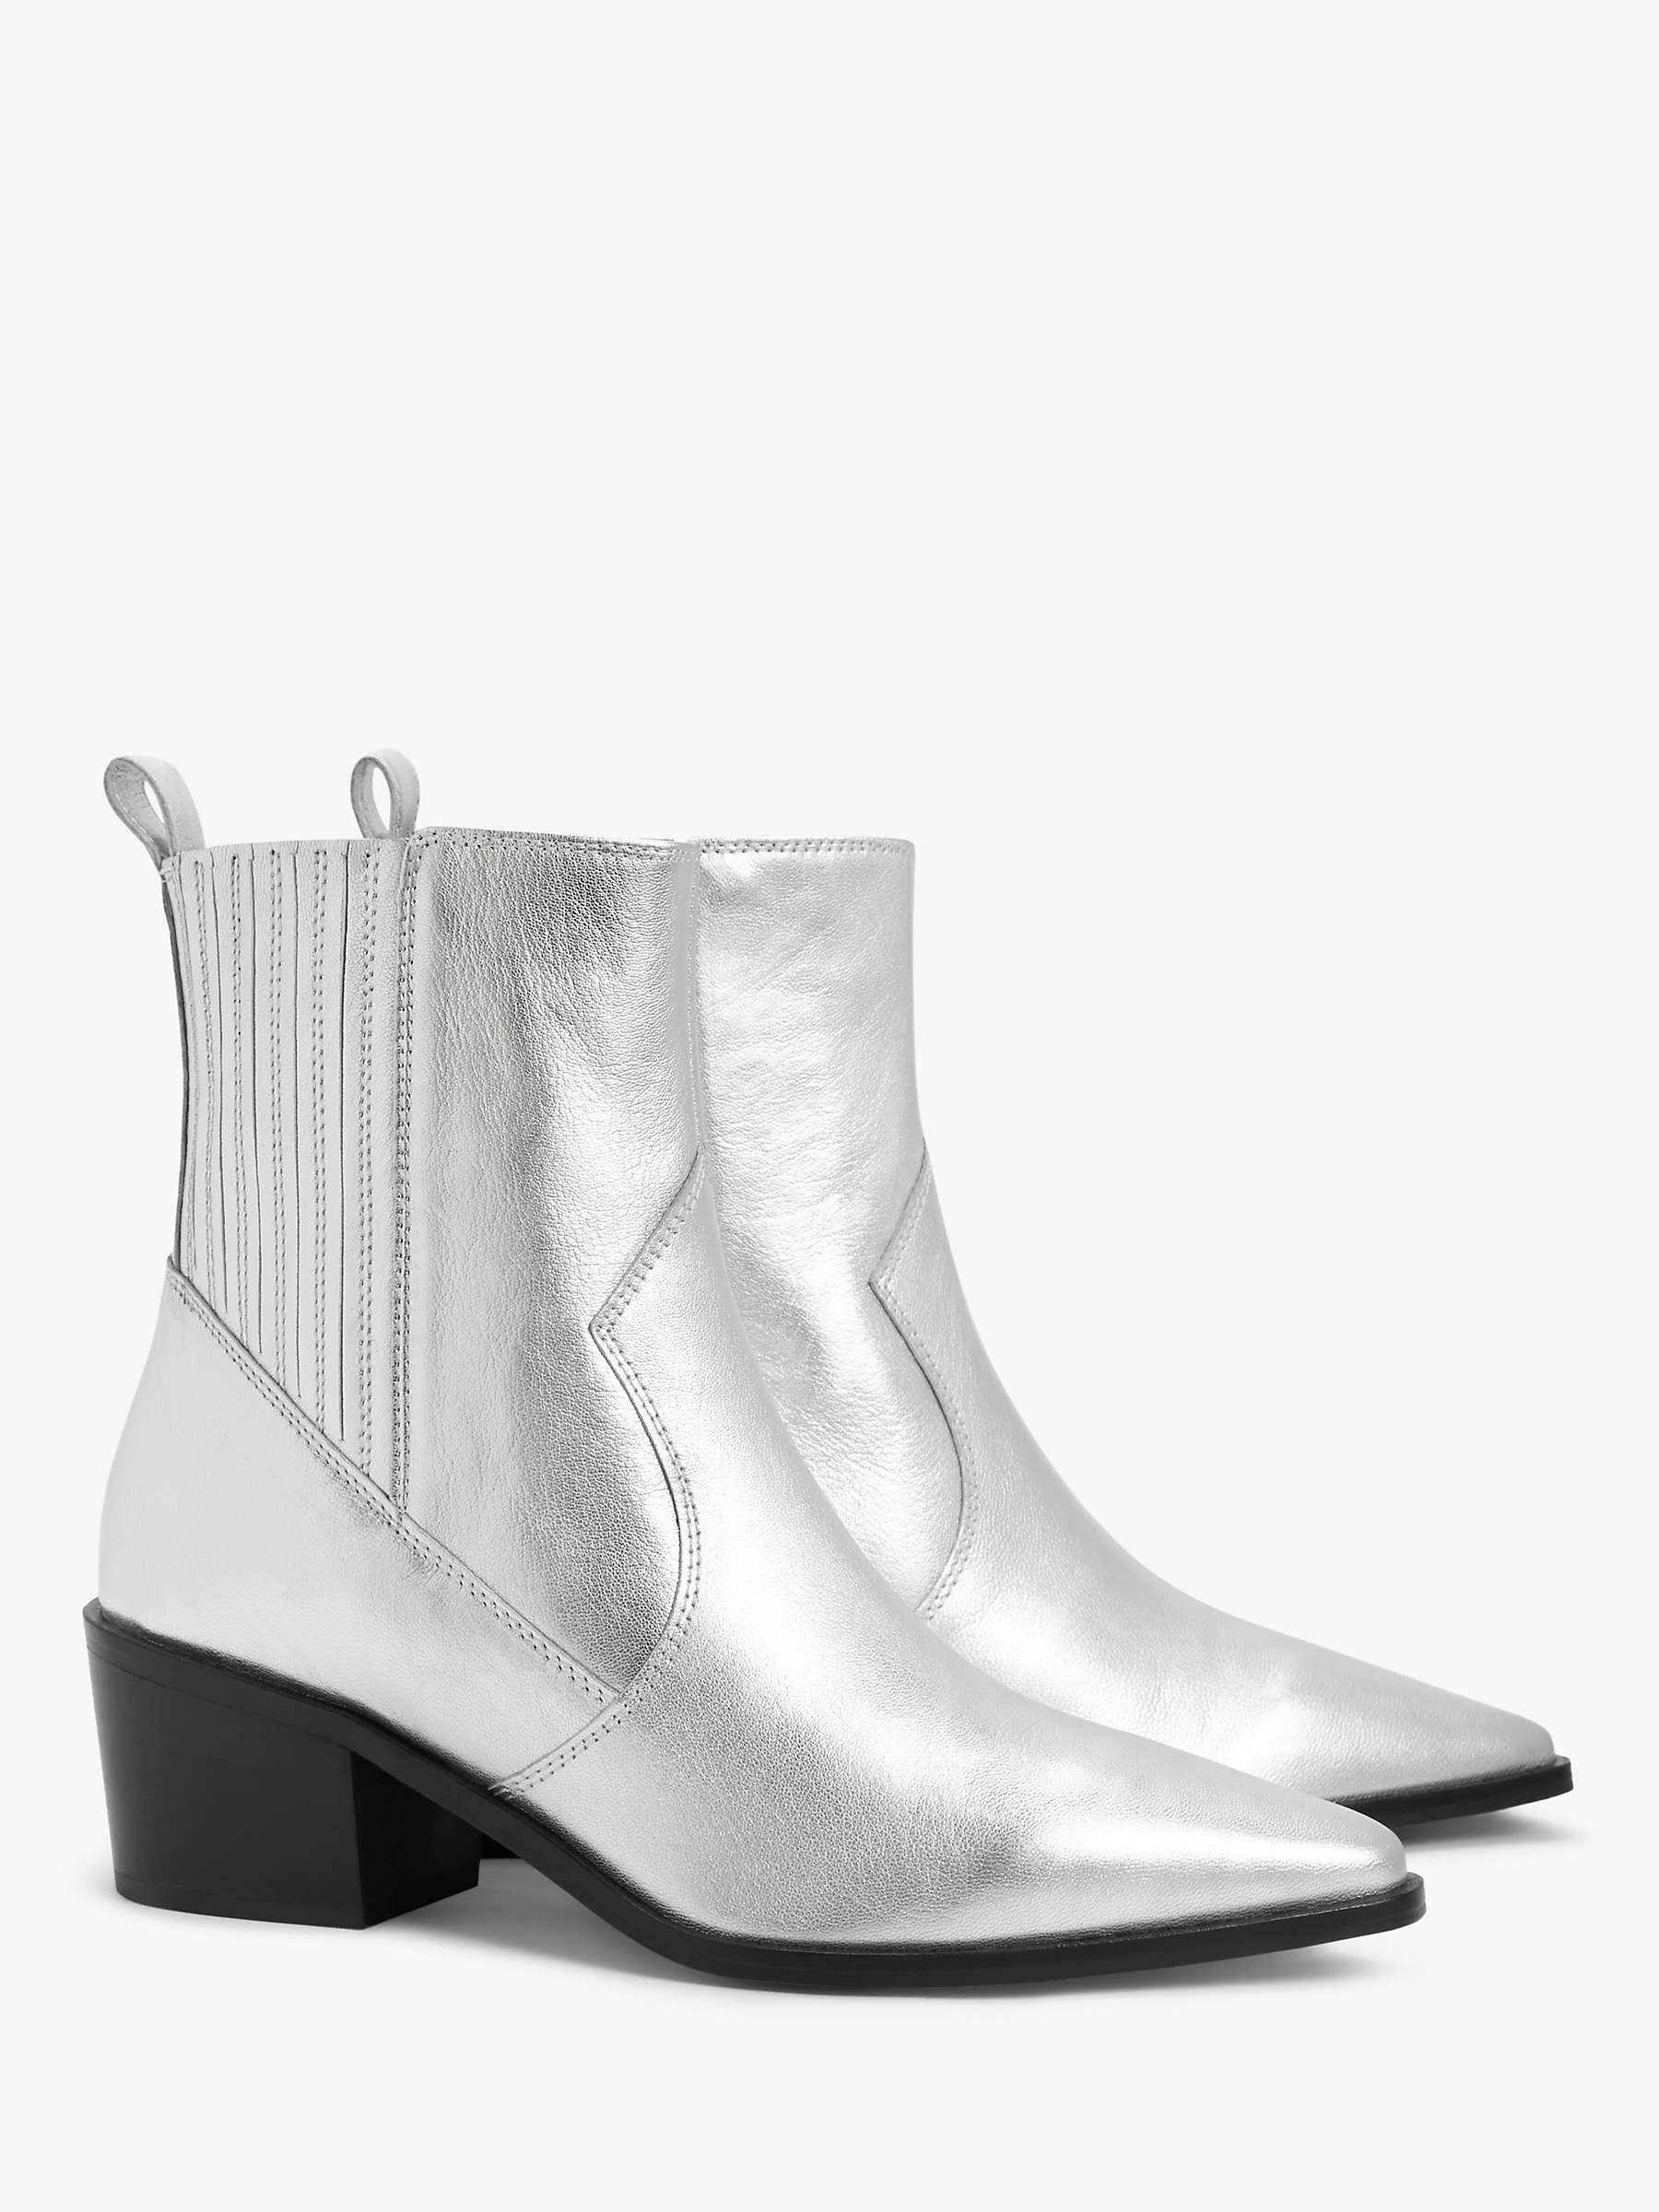 Buy AND/OR Pixie Leather Heeled Chelsea Western Boots Online at johnlewis.com